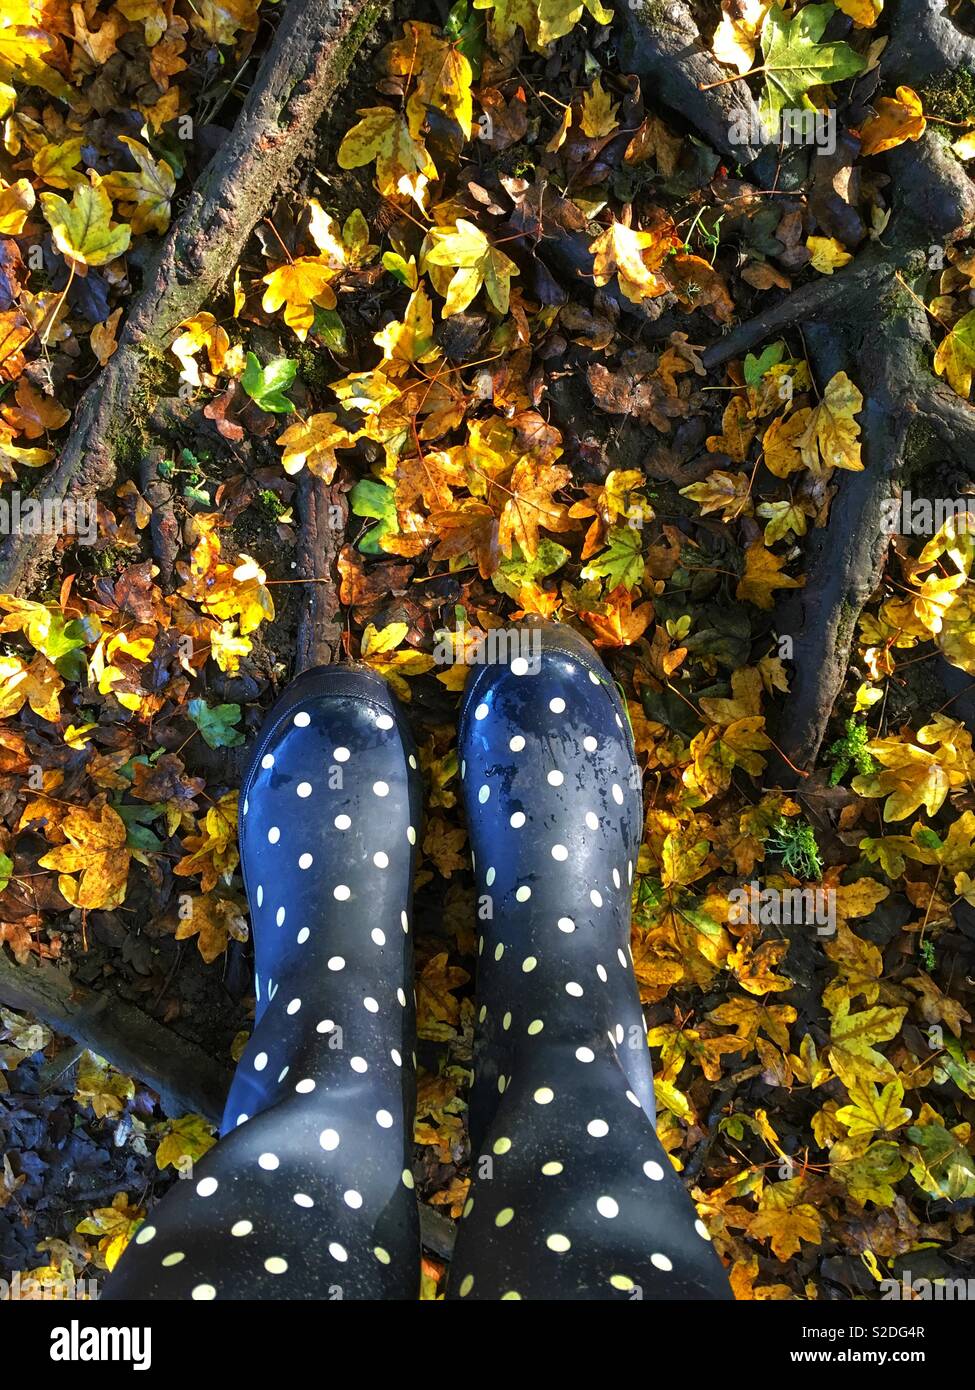 Navy and white spotted wellies amongst Autumn leaves Stock Photo